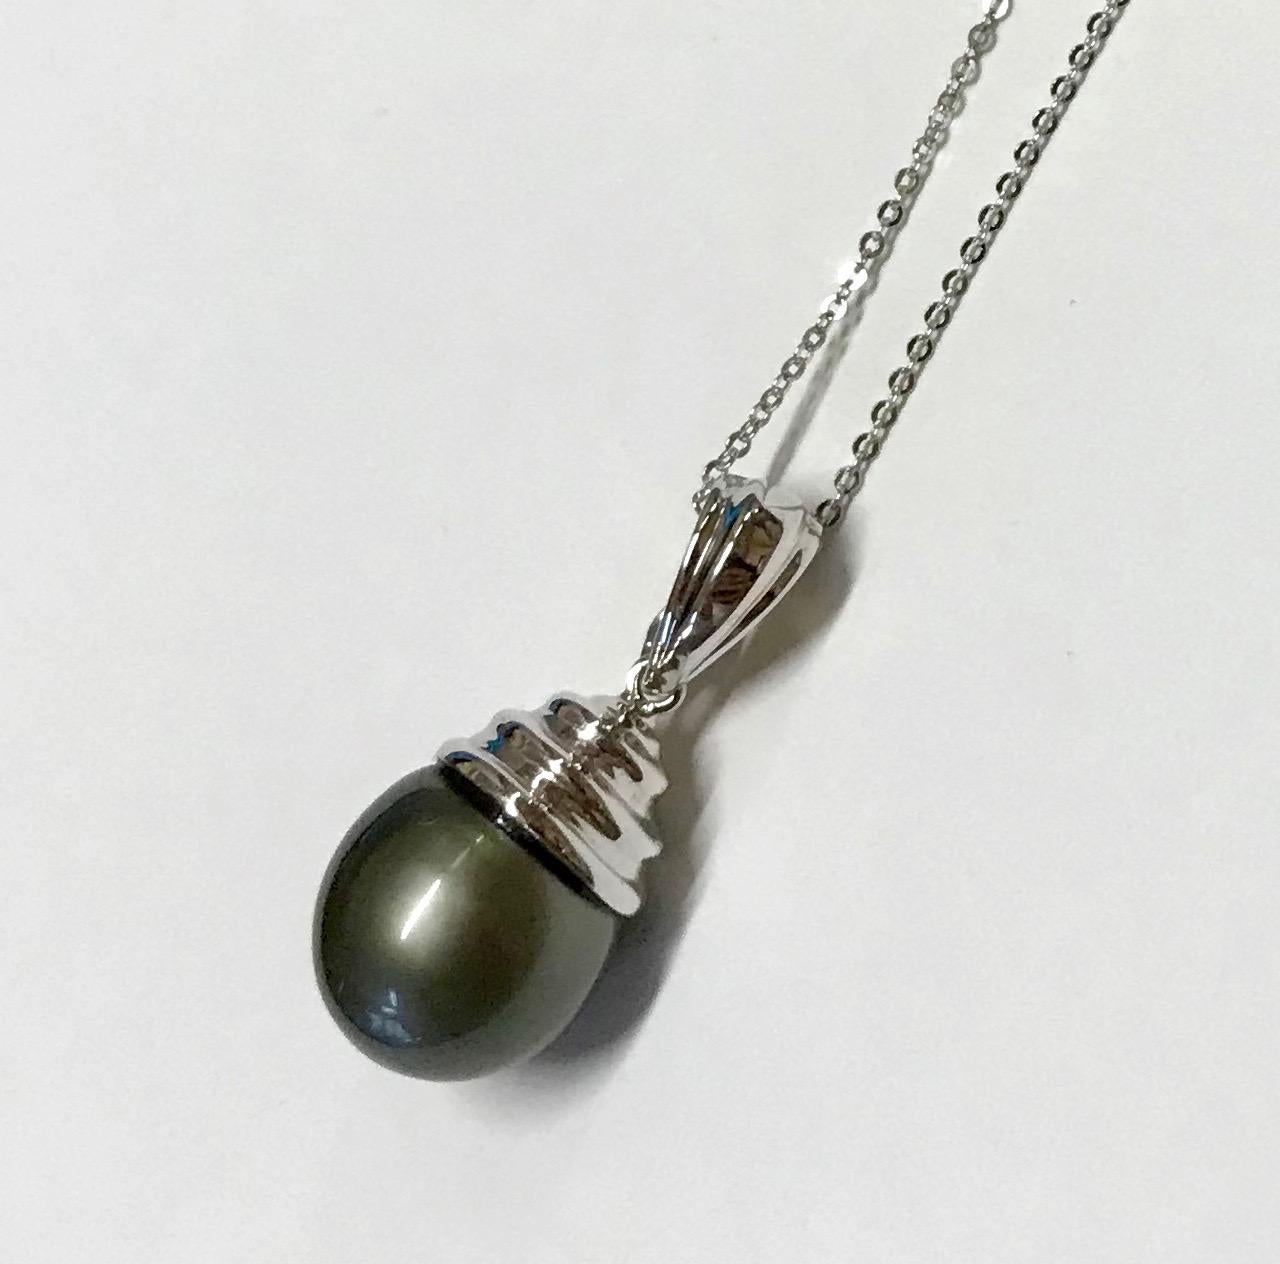 Simple and elegant, this 12.50 carat Tahitian Pearl descends from a beautiful 14K White Gold setting.

Material: 14K White Gold
Center Stone Details: 12.50 Carat Tahitian Pearl
Chain: 18 inches

Fine one-of-a-kind craftsmanship meets incredible